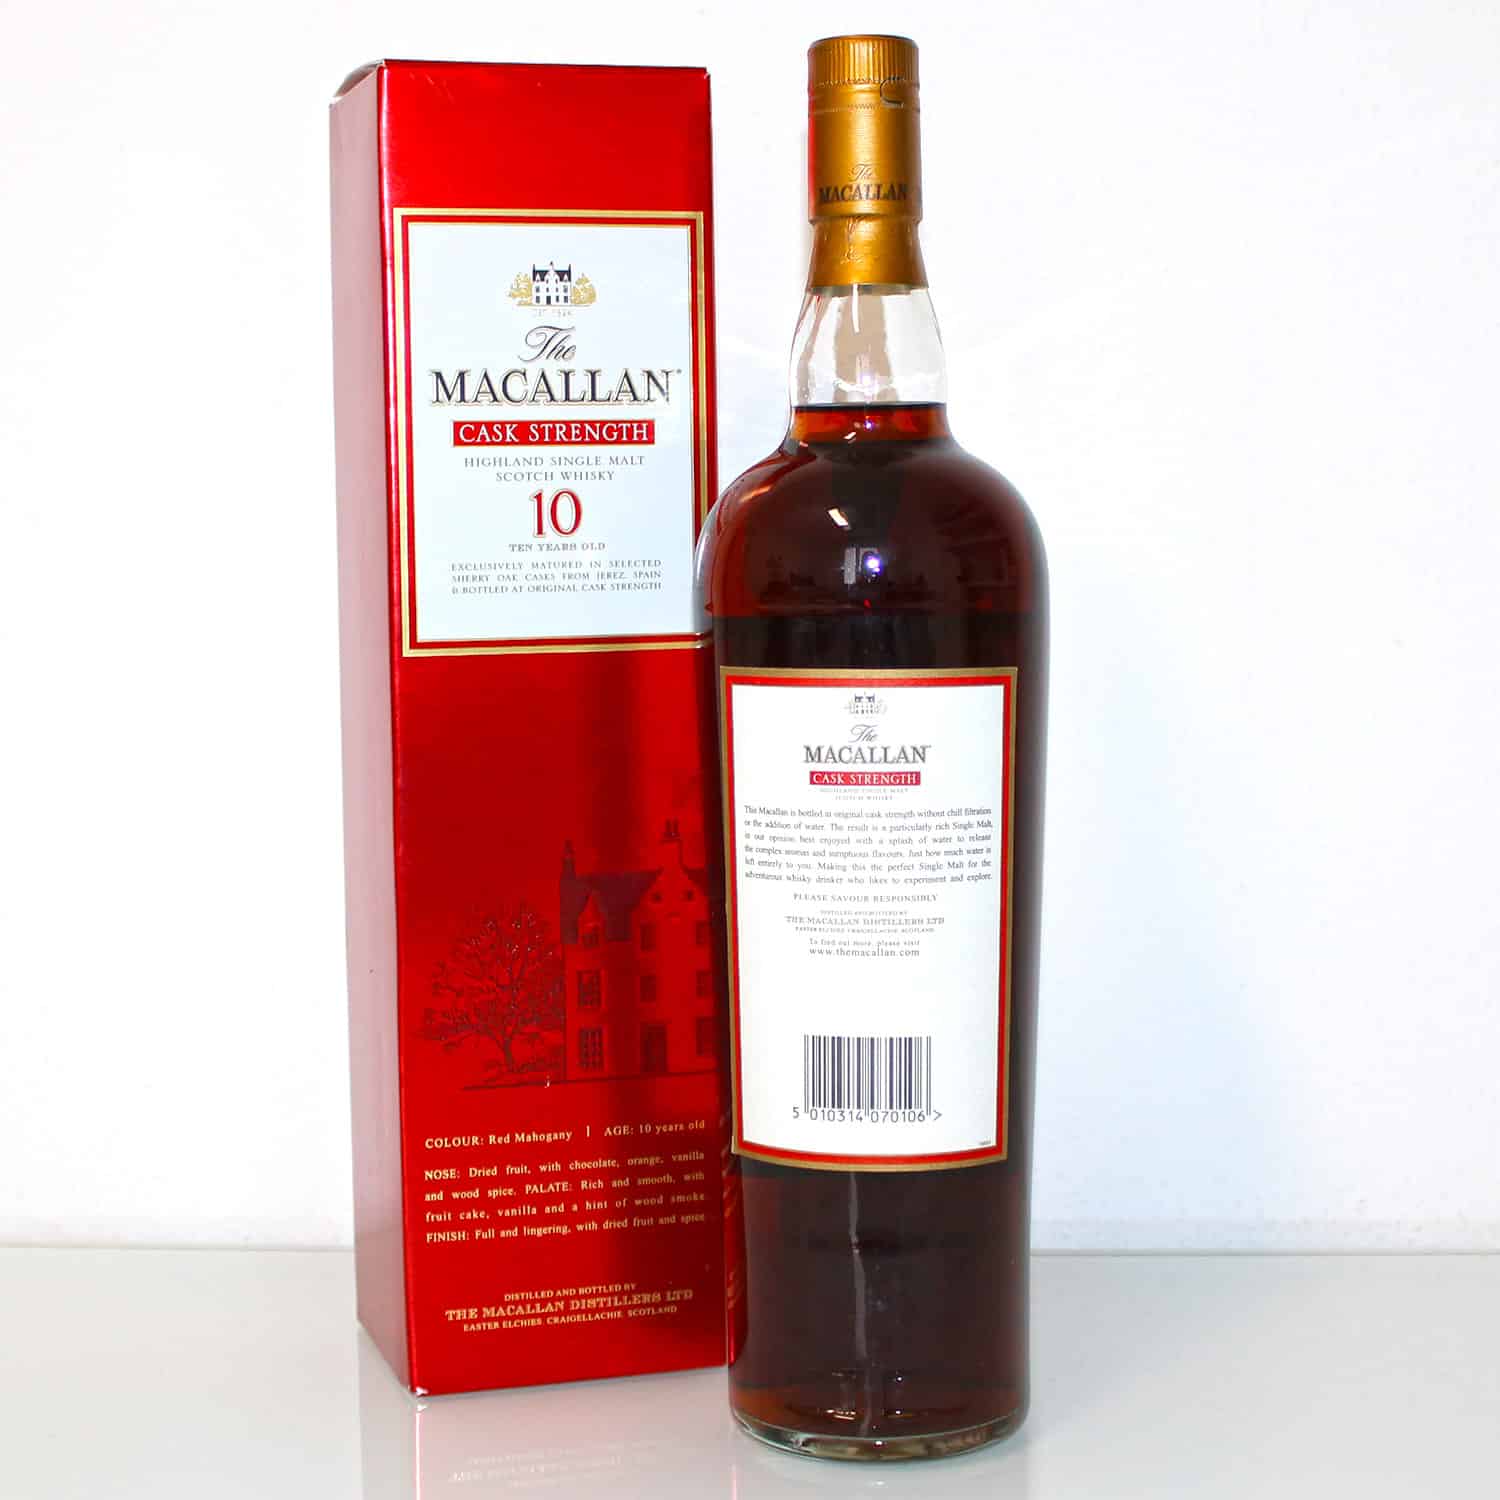 Macallan Cask Strength 10 Year Old 1 Litre Back